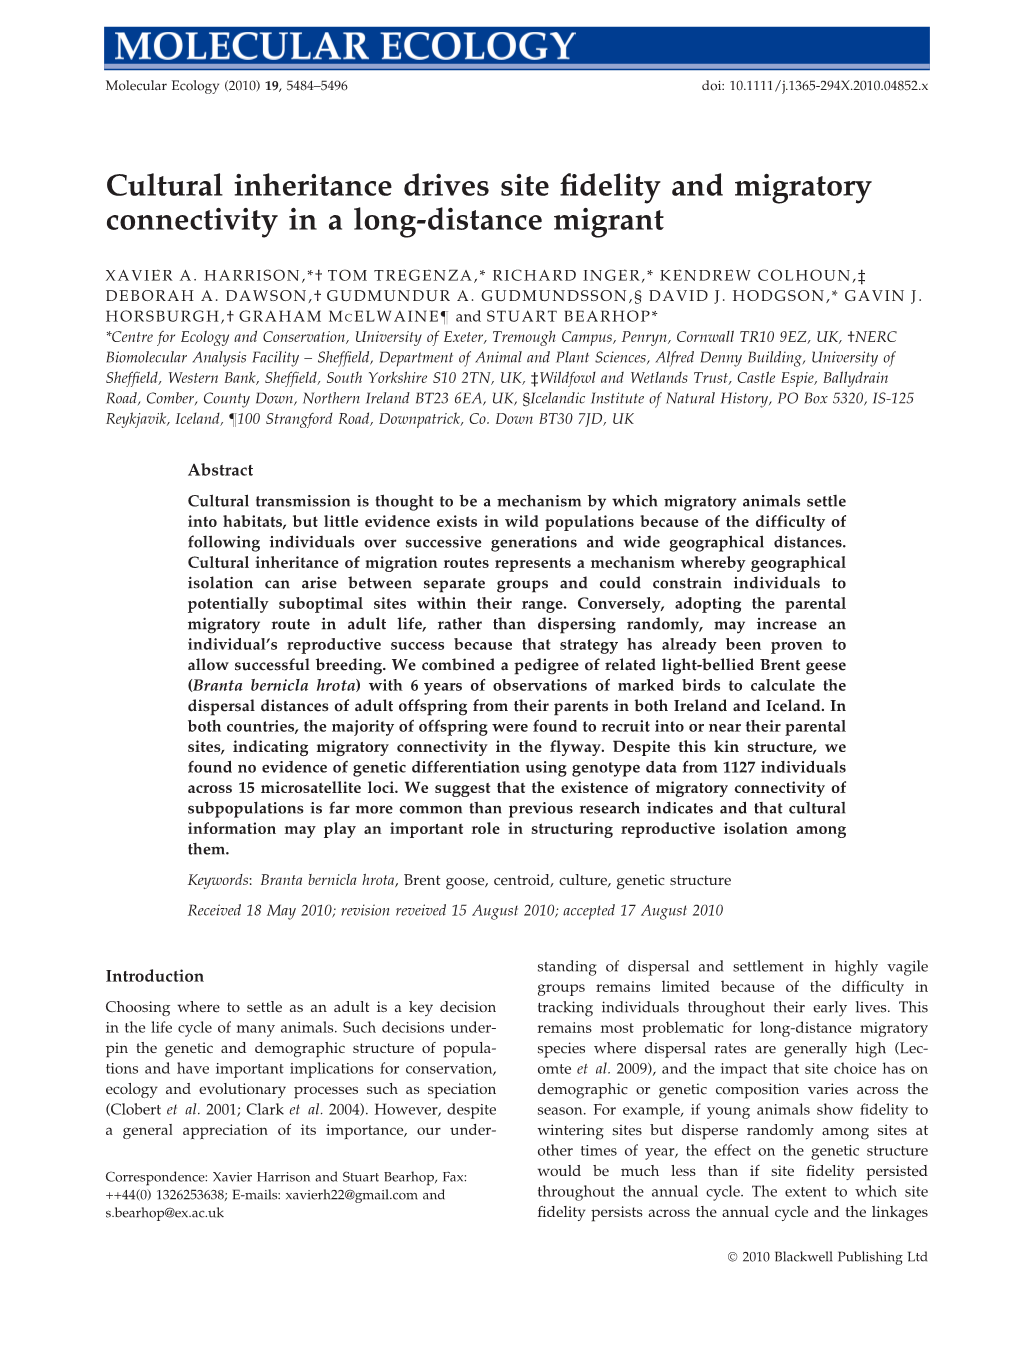 Cultural Inheritance Drives Site Fidelity and Migratory Connectivity in a Long